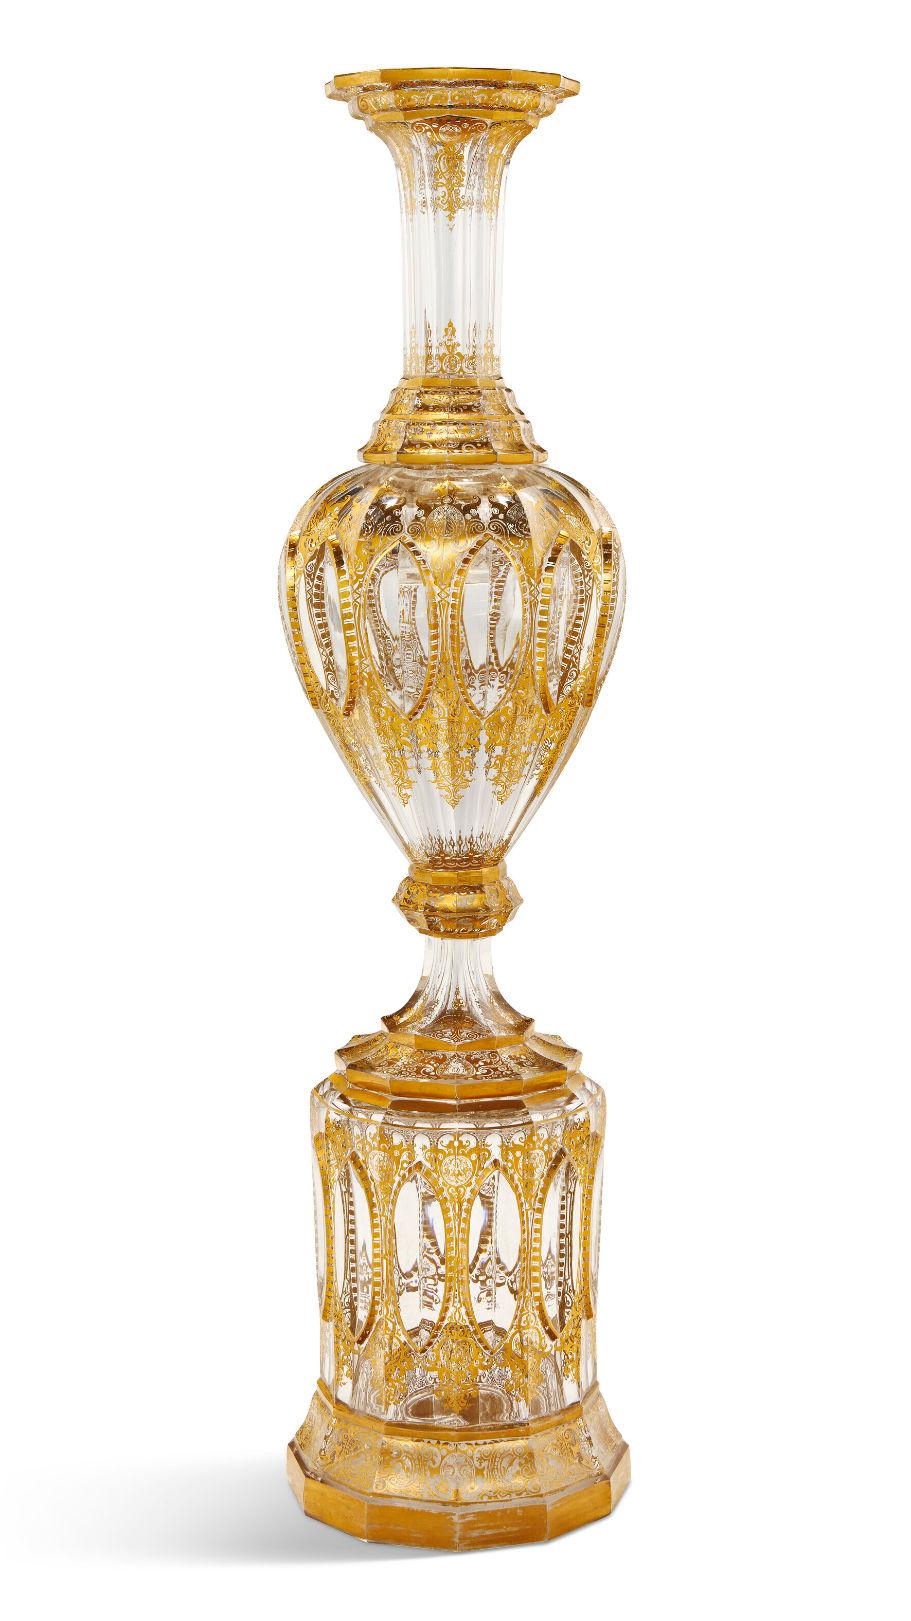 Our very large (33 1/2 inch tall) and elegant gilt-decorated glass vase on stand dates from the third quarter of the 19th century. Attributed by a leading international auction house to Wilhelm Hoffman (1808-1866) of the Harrach glassworks in